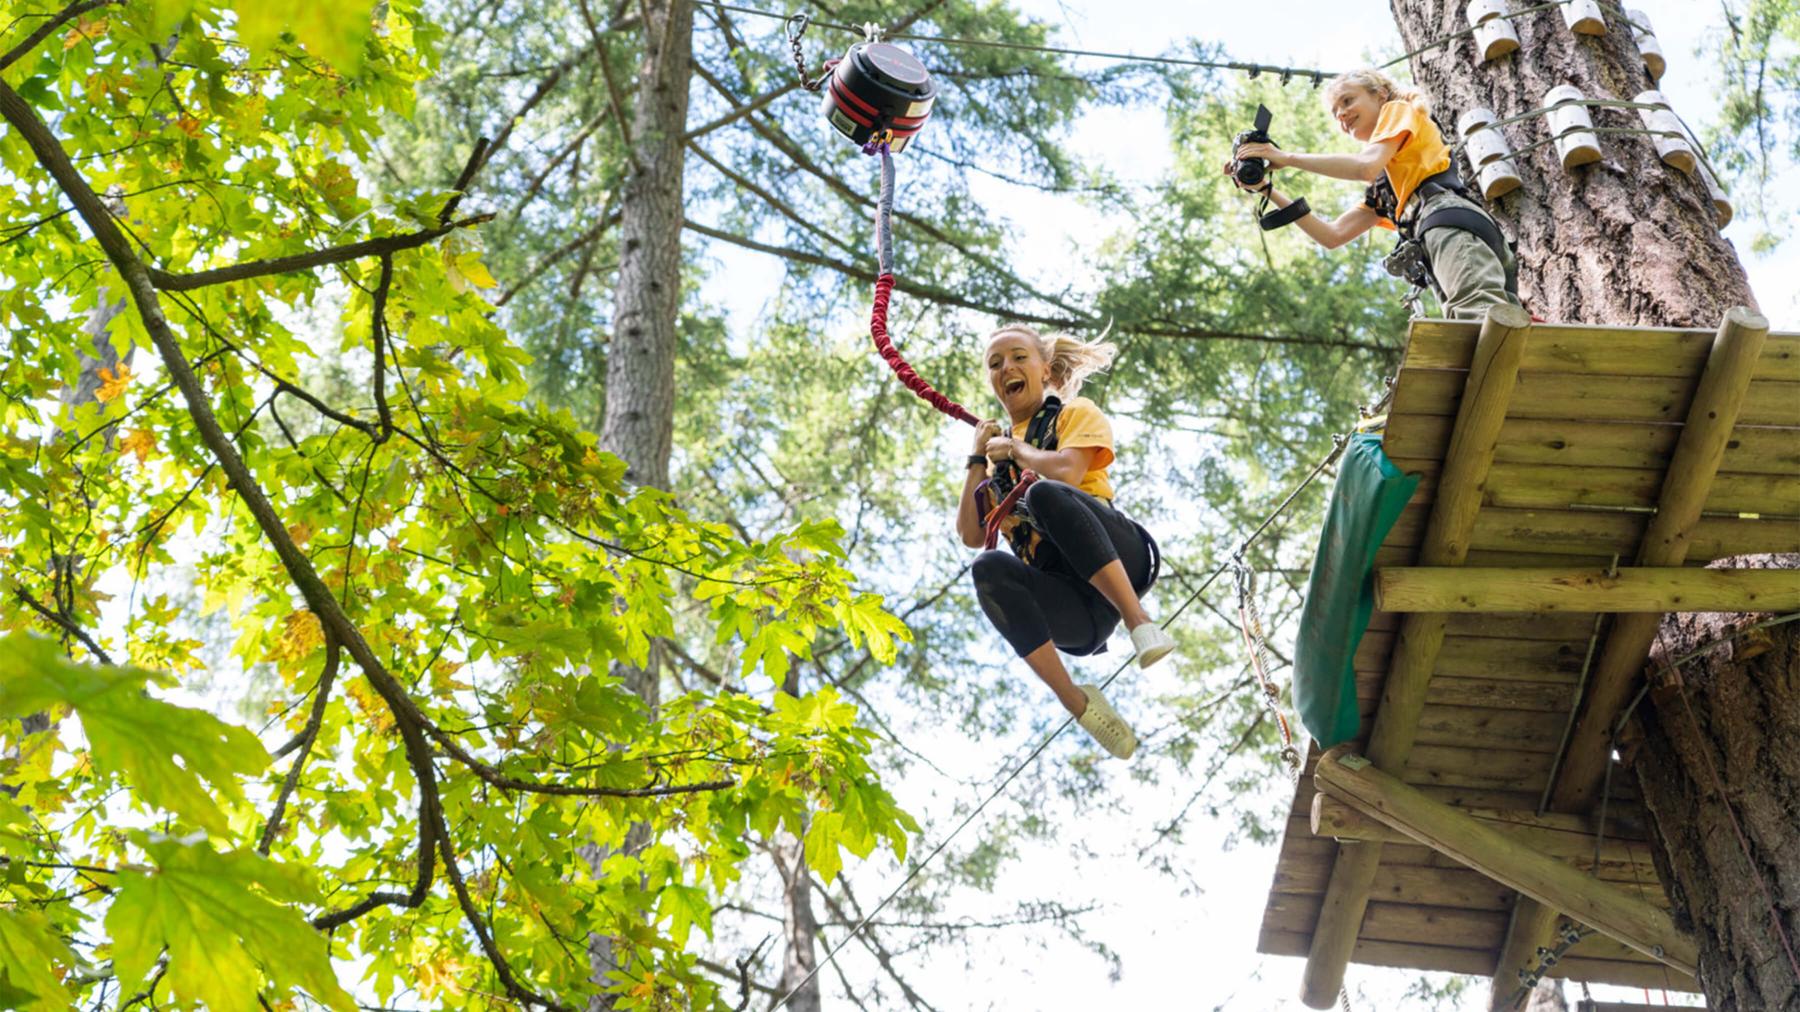 A woman jumps off a platform to ride a zipline through the forest.